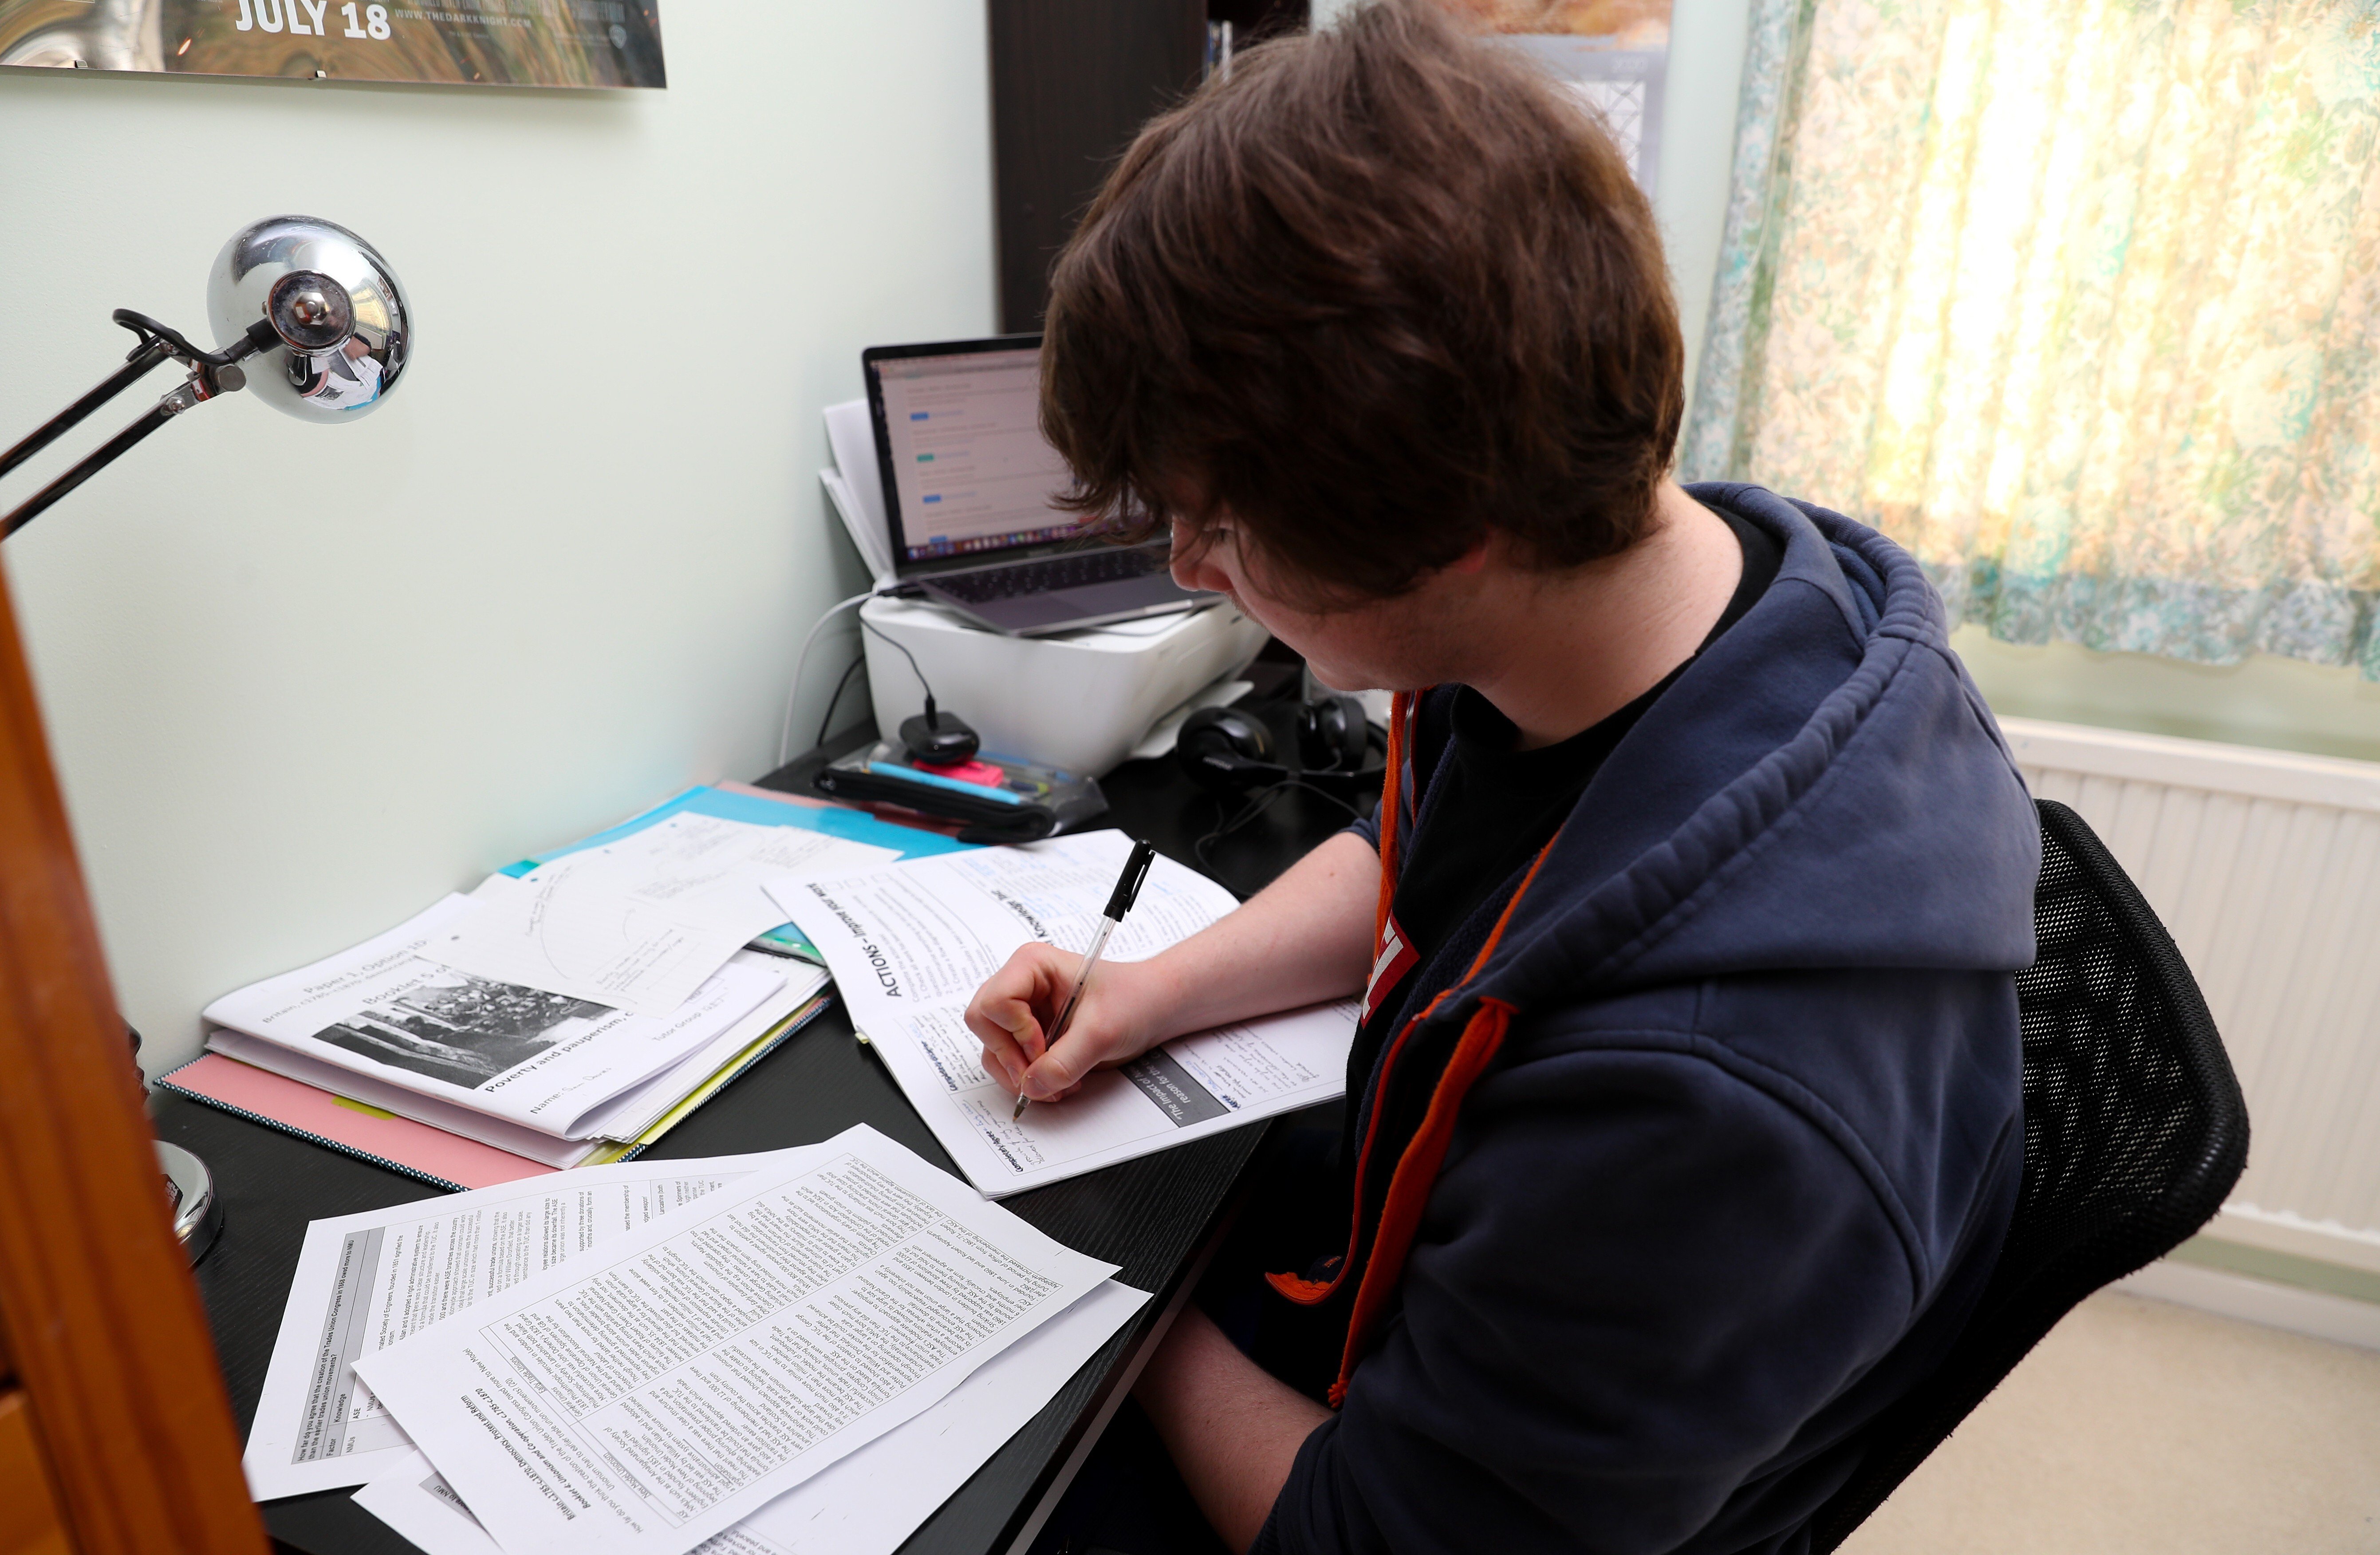 A student doing his school work from home after British Prime Minister Boris Johnson put the country in lockdown. Photo: PA Images via Getty Images